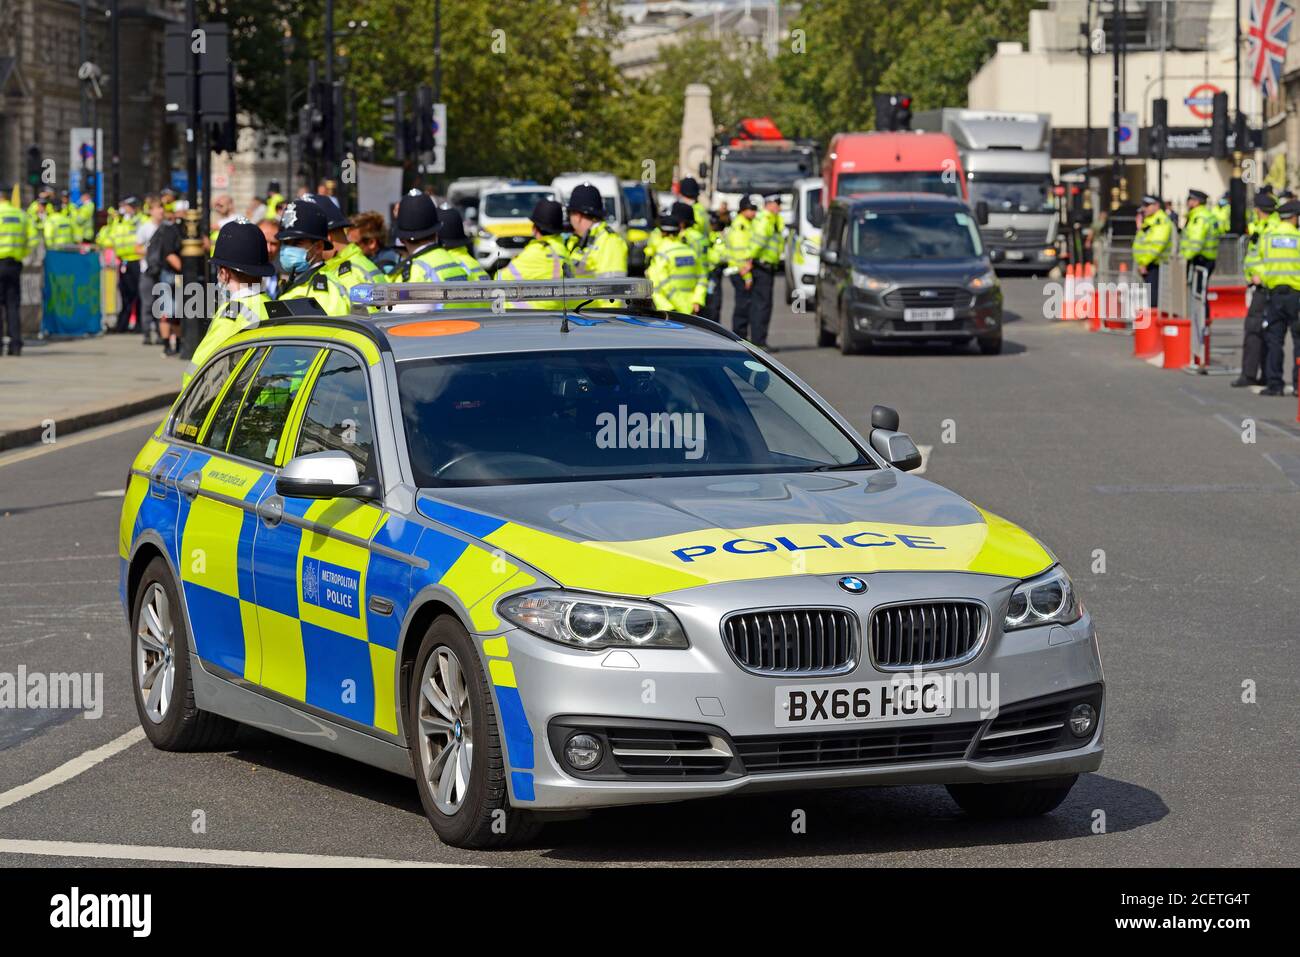 London, UK. Metropolitan Police officers at an Extinction Rebellion protest in Parliament Square during the COVID pandemic, 1st Sept 2020 Stock Photo